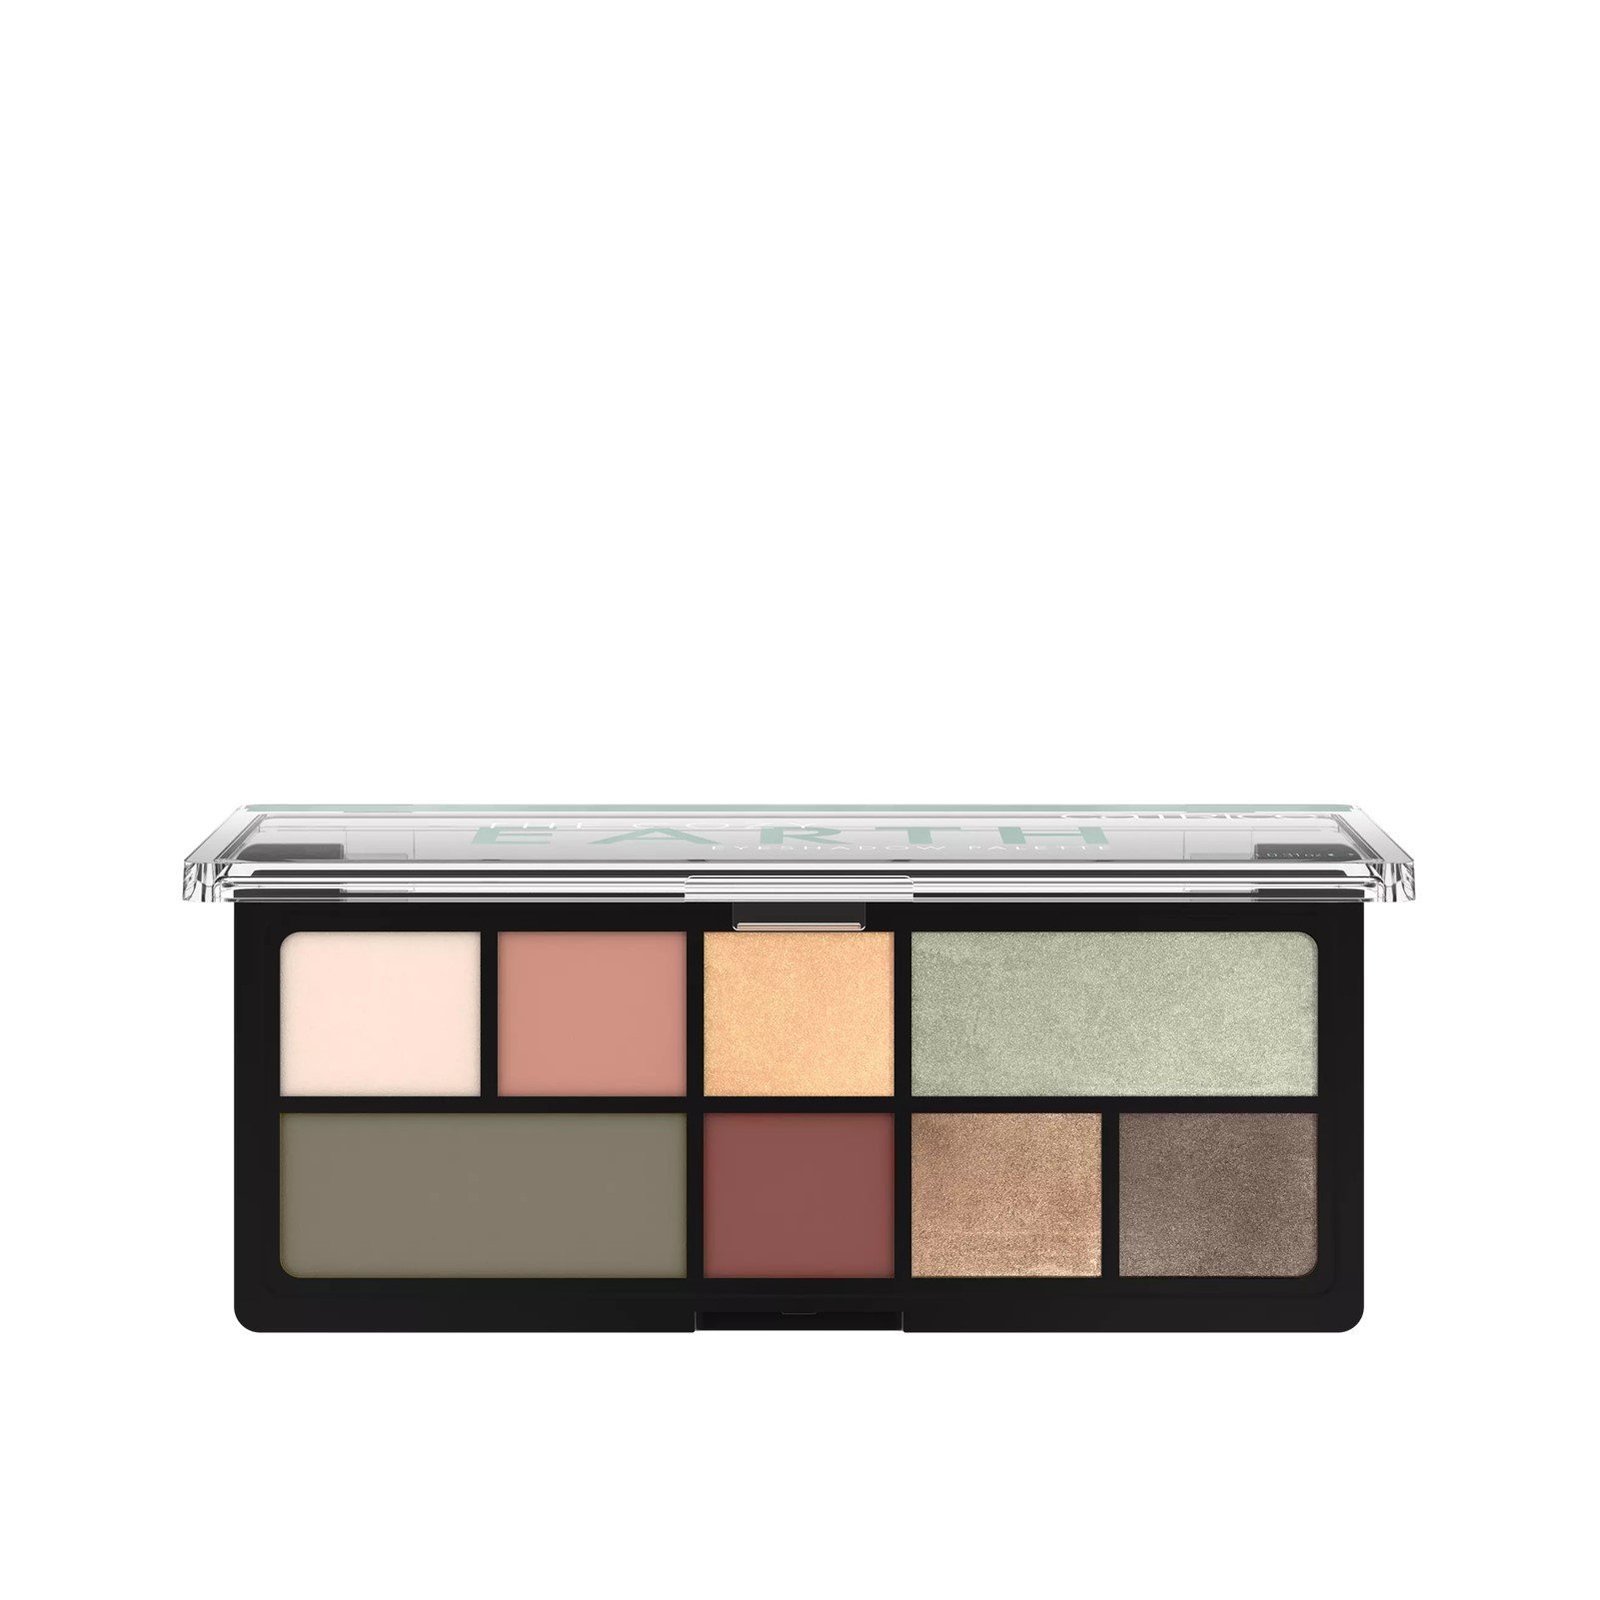 Buy Catrice The Cozy Earth Eyeshadow Palette (0.31 oz) · USA